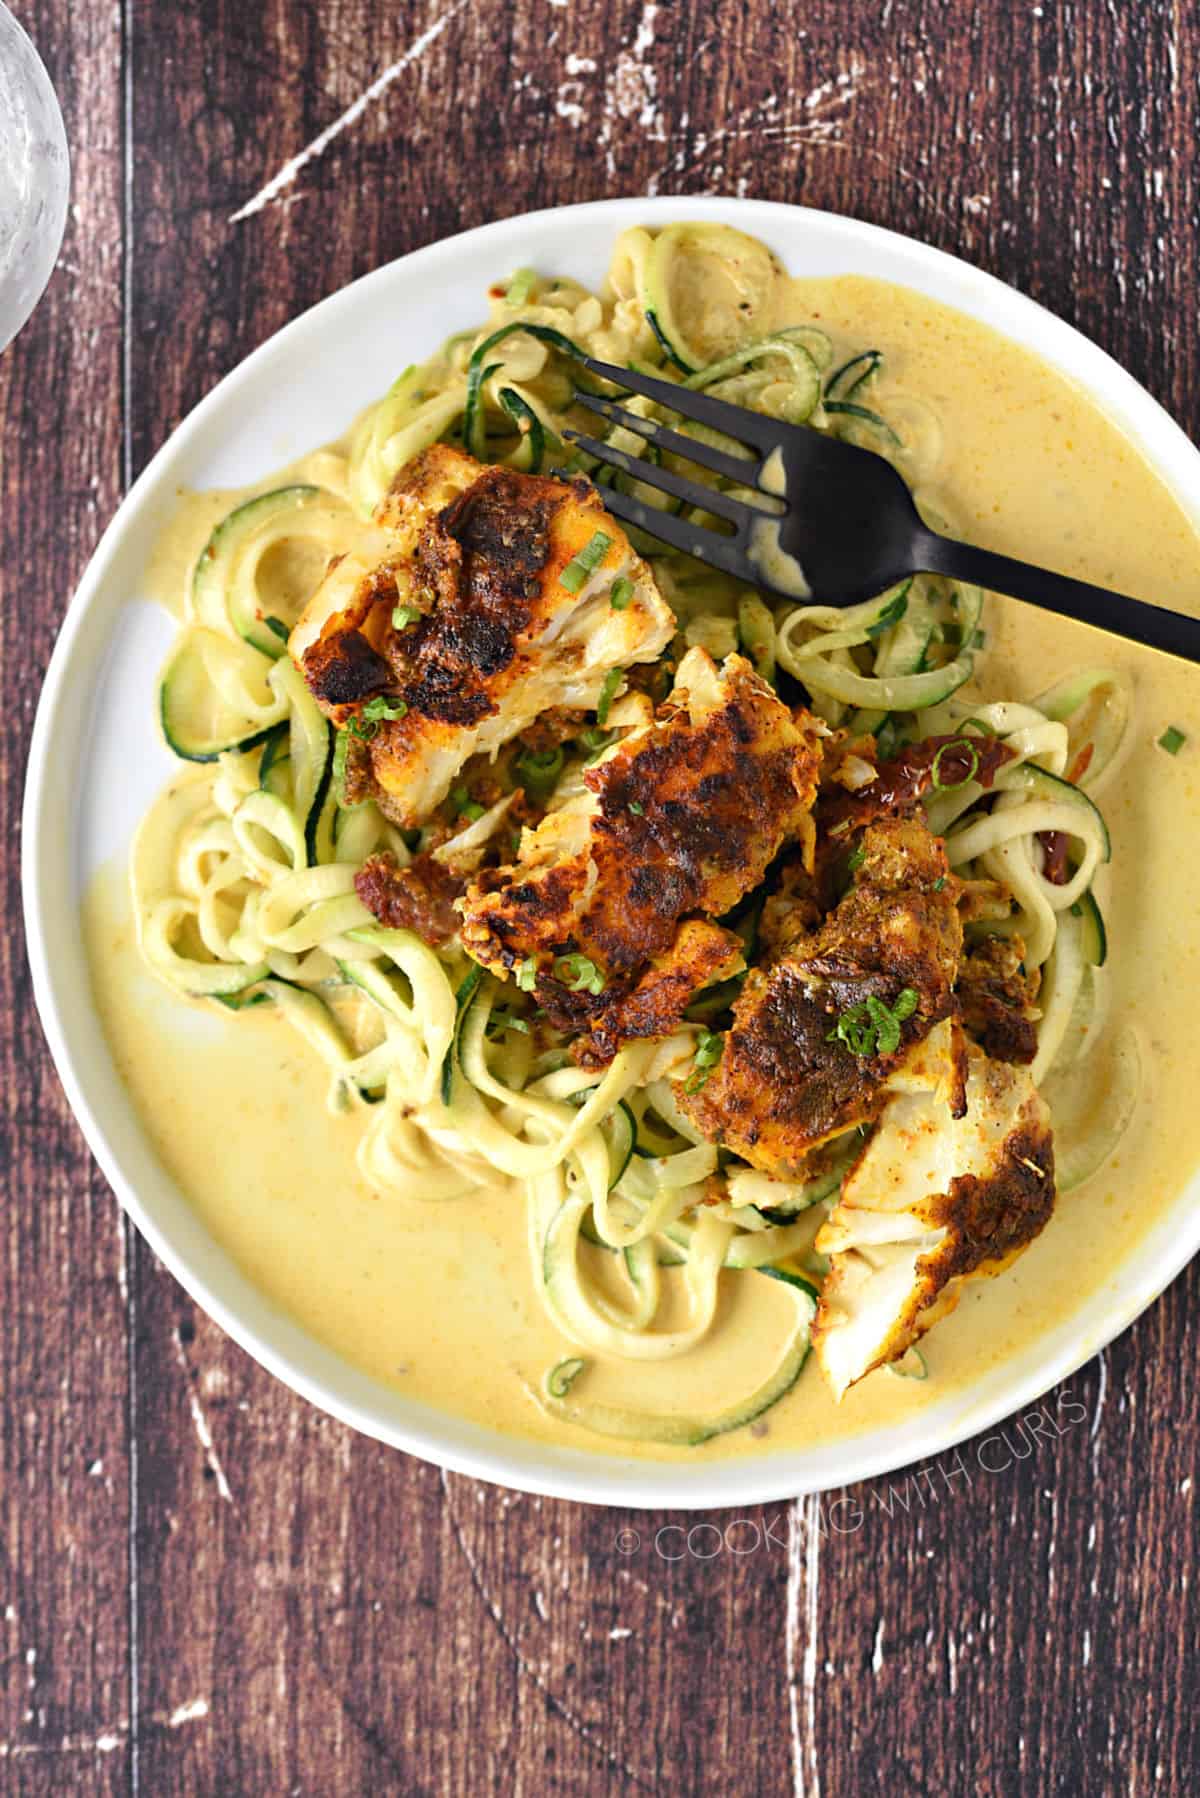 Looking down on seasoned cod laying on a bed of zucchini noodles topped with a turmeric cream sauce and a black fork off to the side.